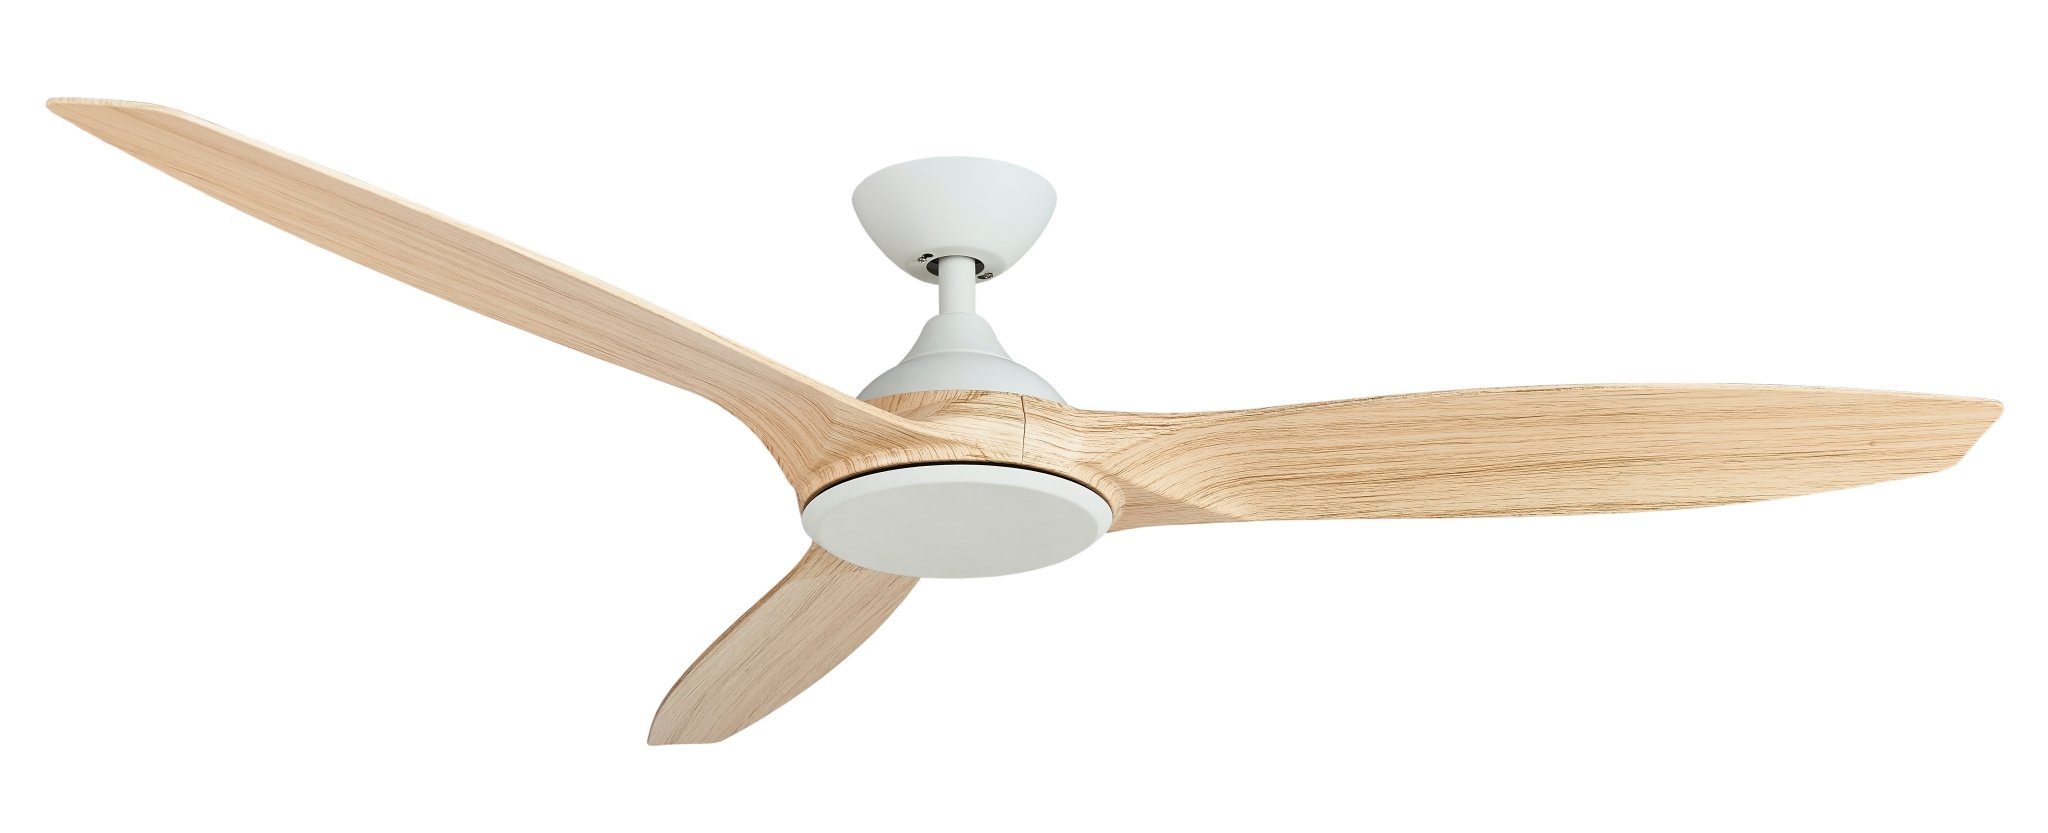 56″ (1420mm) Newport DC Ceiling Fan Only With 3 ABS Blade & Remote Control - Mases LightingMartec